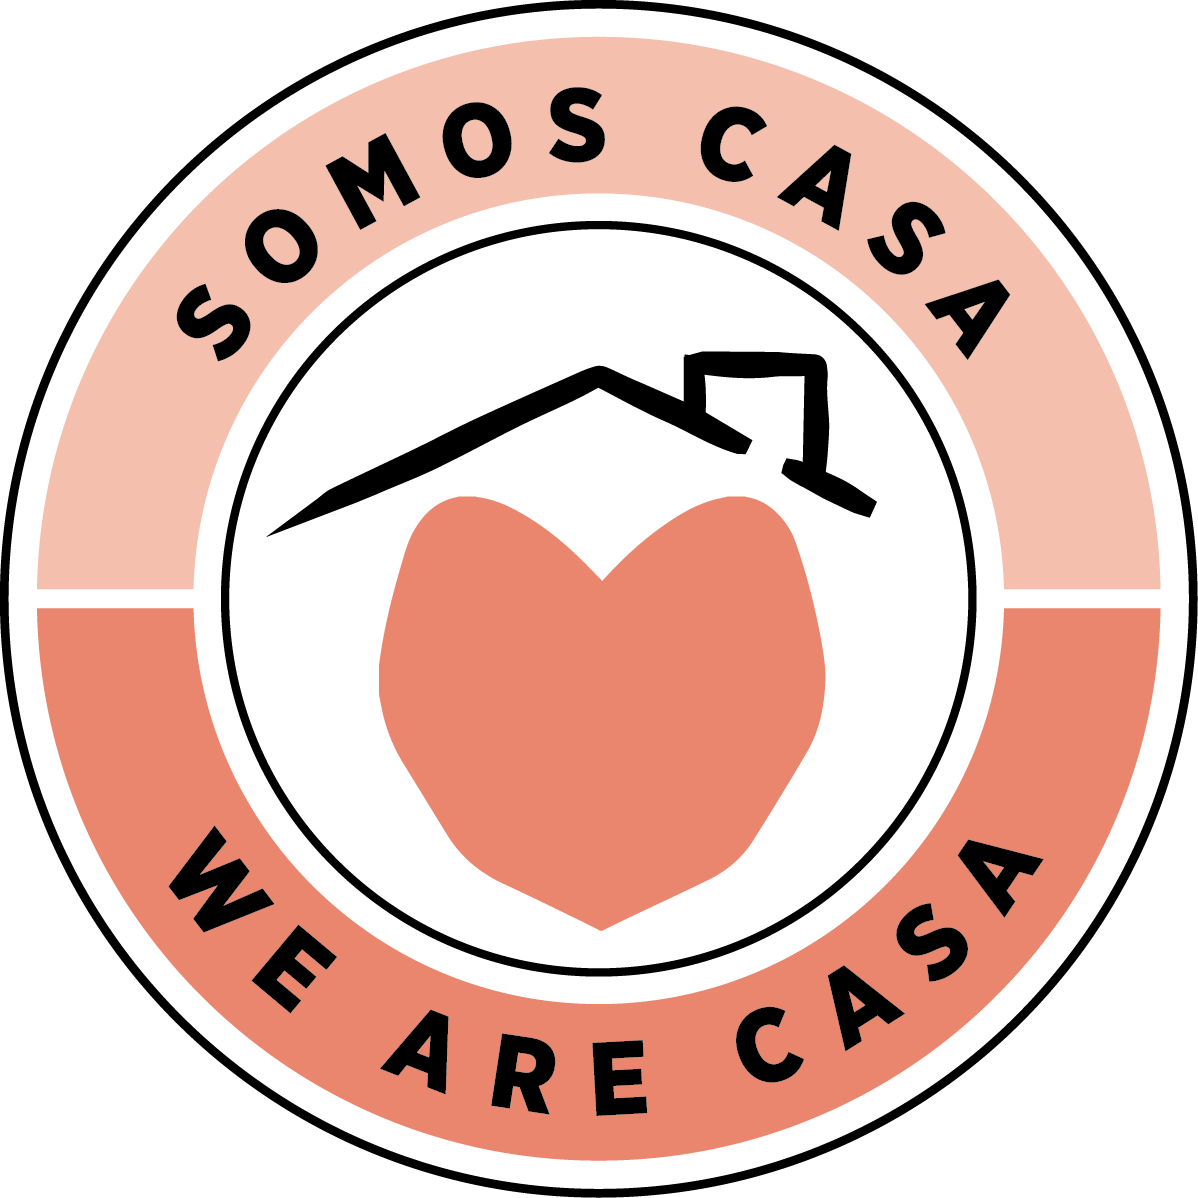 Casa sticker reading Somos Casa, We are Casa which is a slogan we use for our daycare centers.